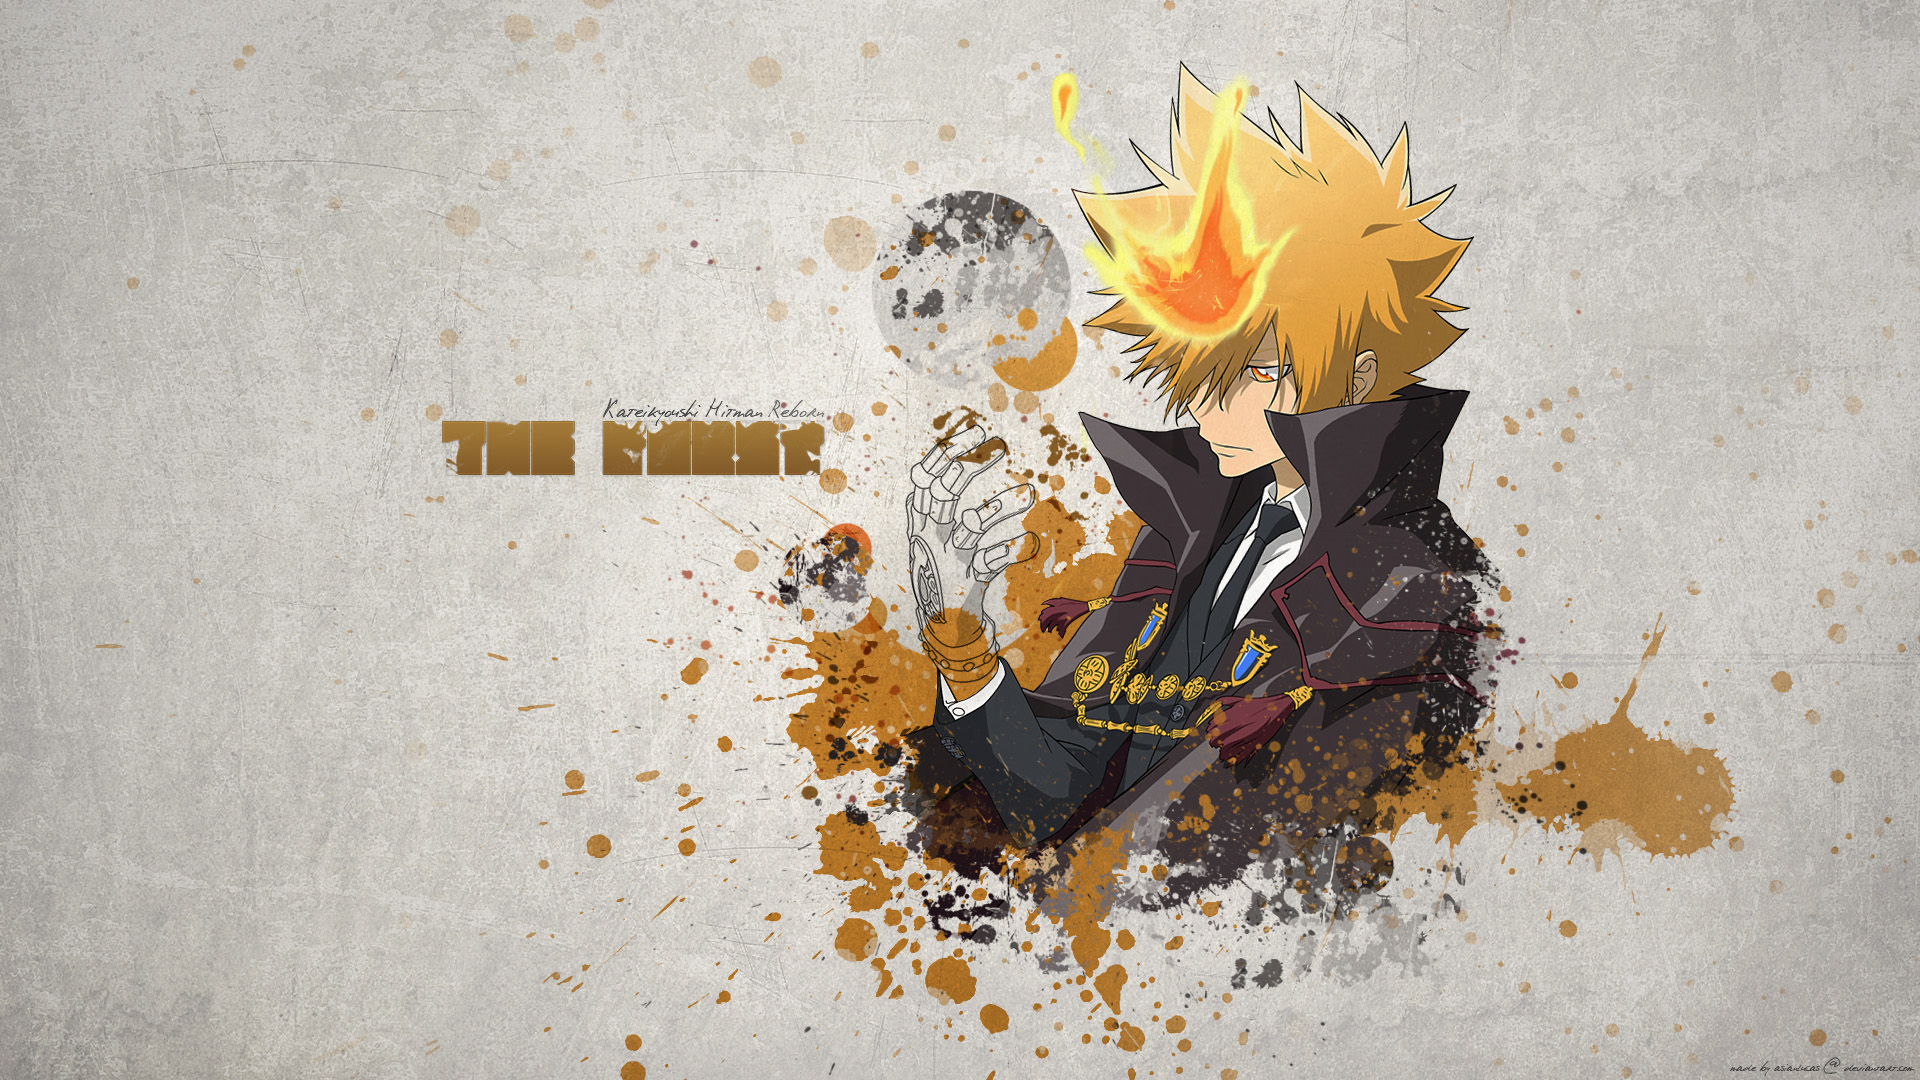 Giotto Kateky Hitman Reborn HD Wallpaper And Background